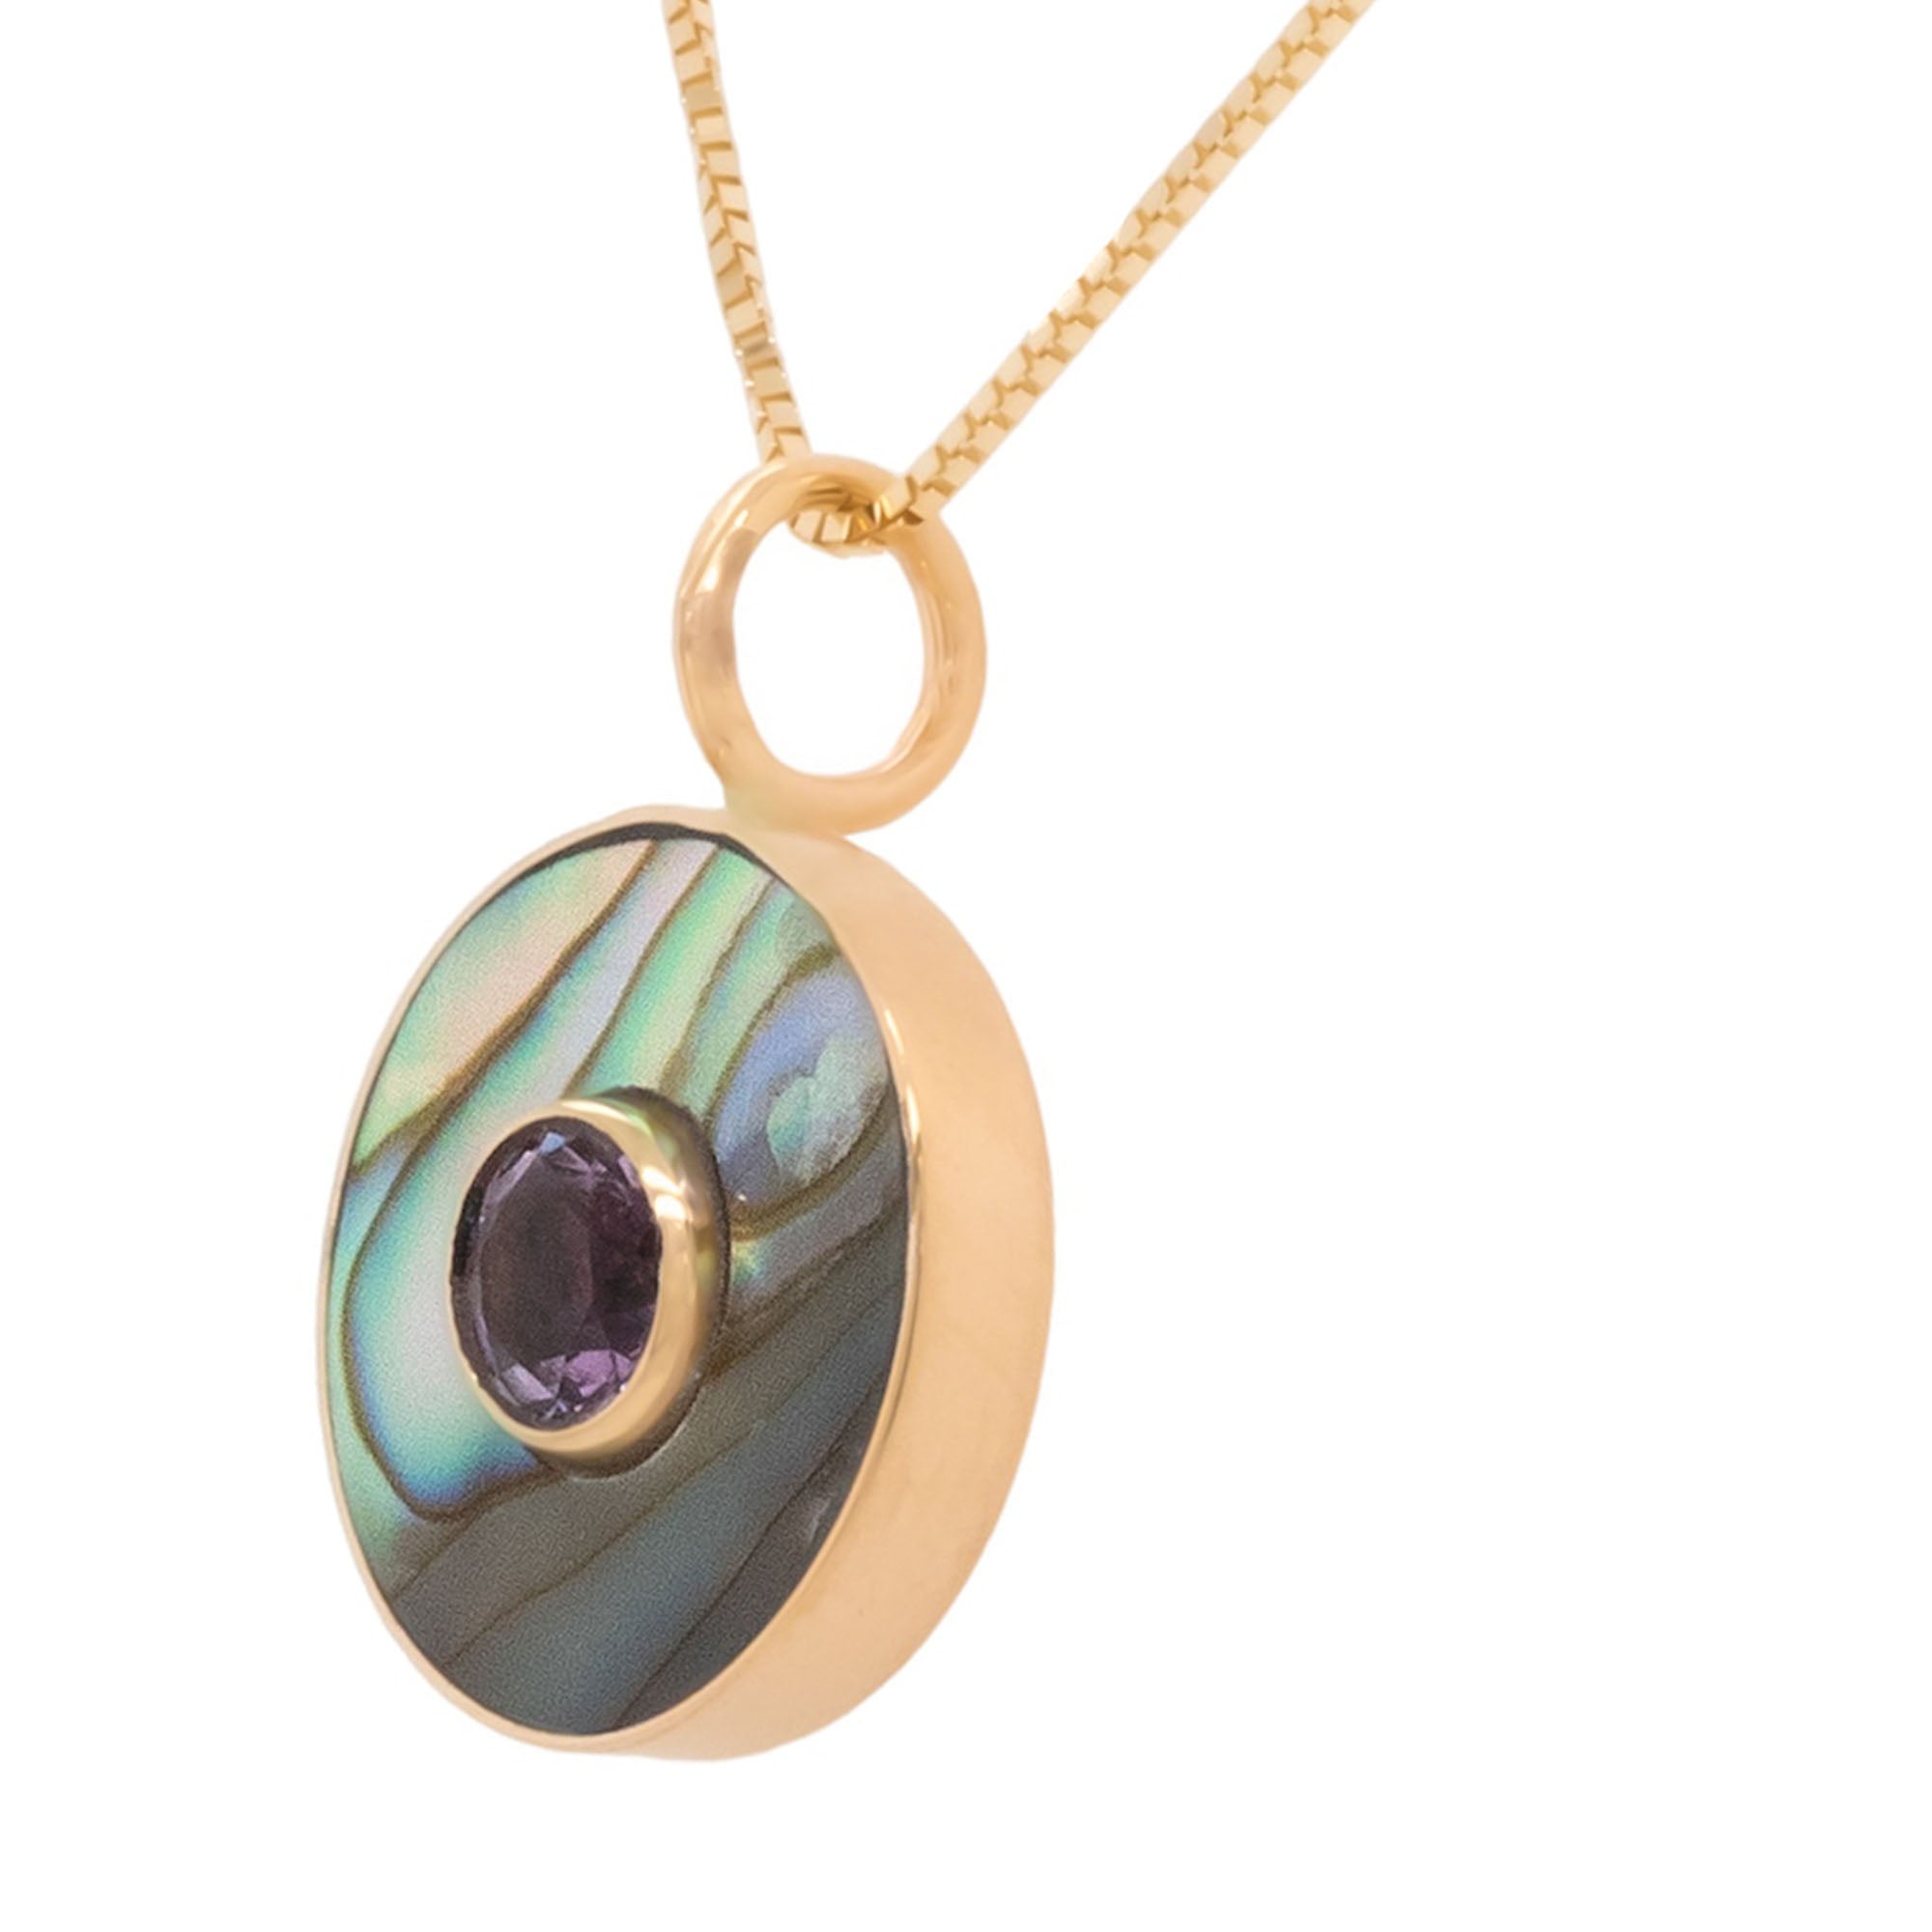 California Tourmaline and Abalone Cerclen Necklace